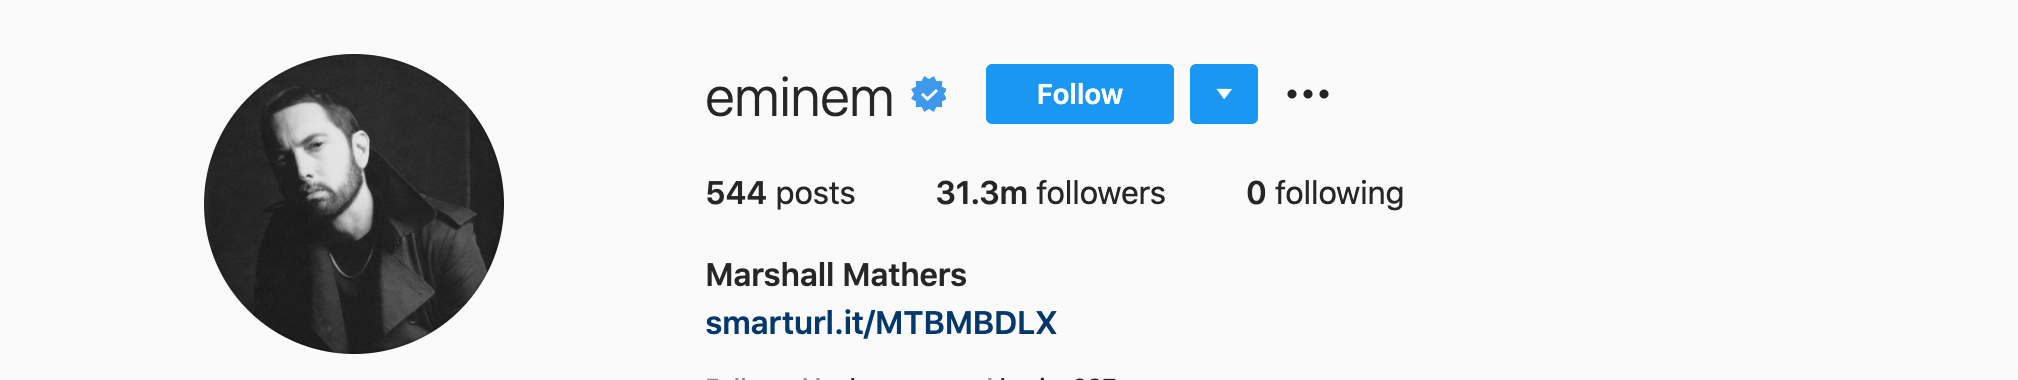 Top Instagram Influencers - MARSHALL MATHERS